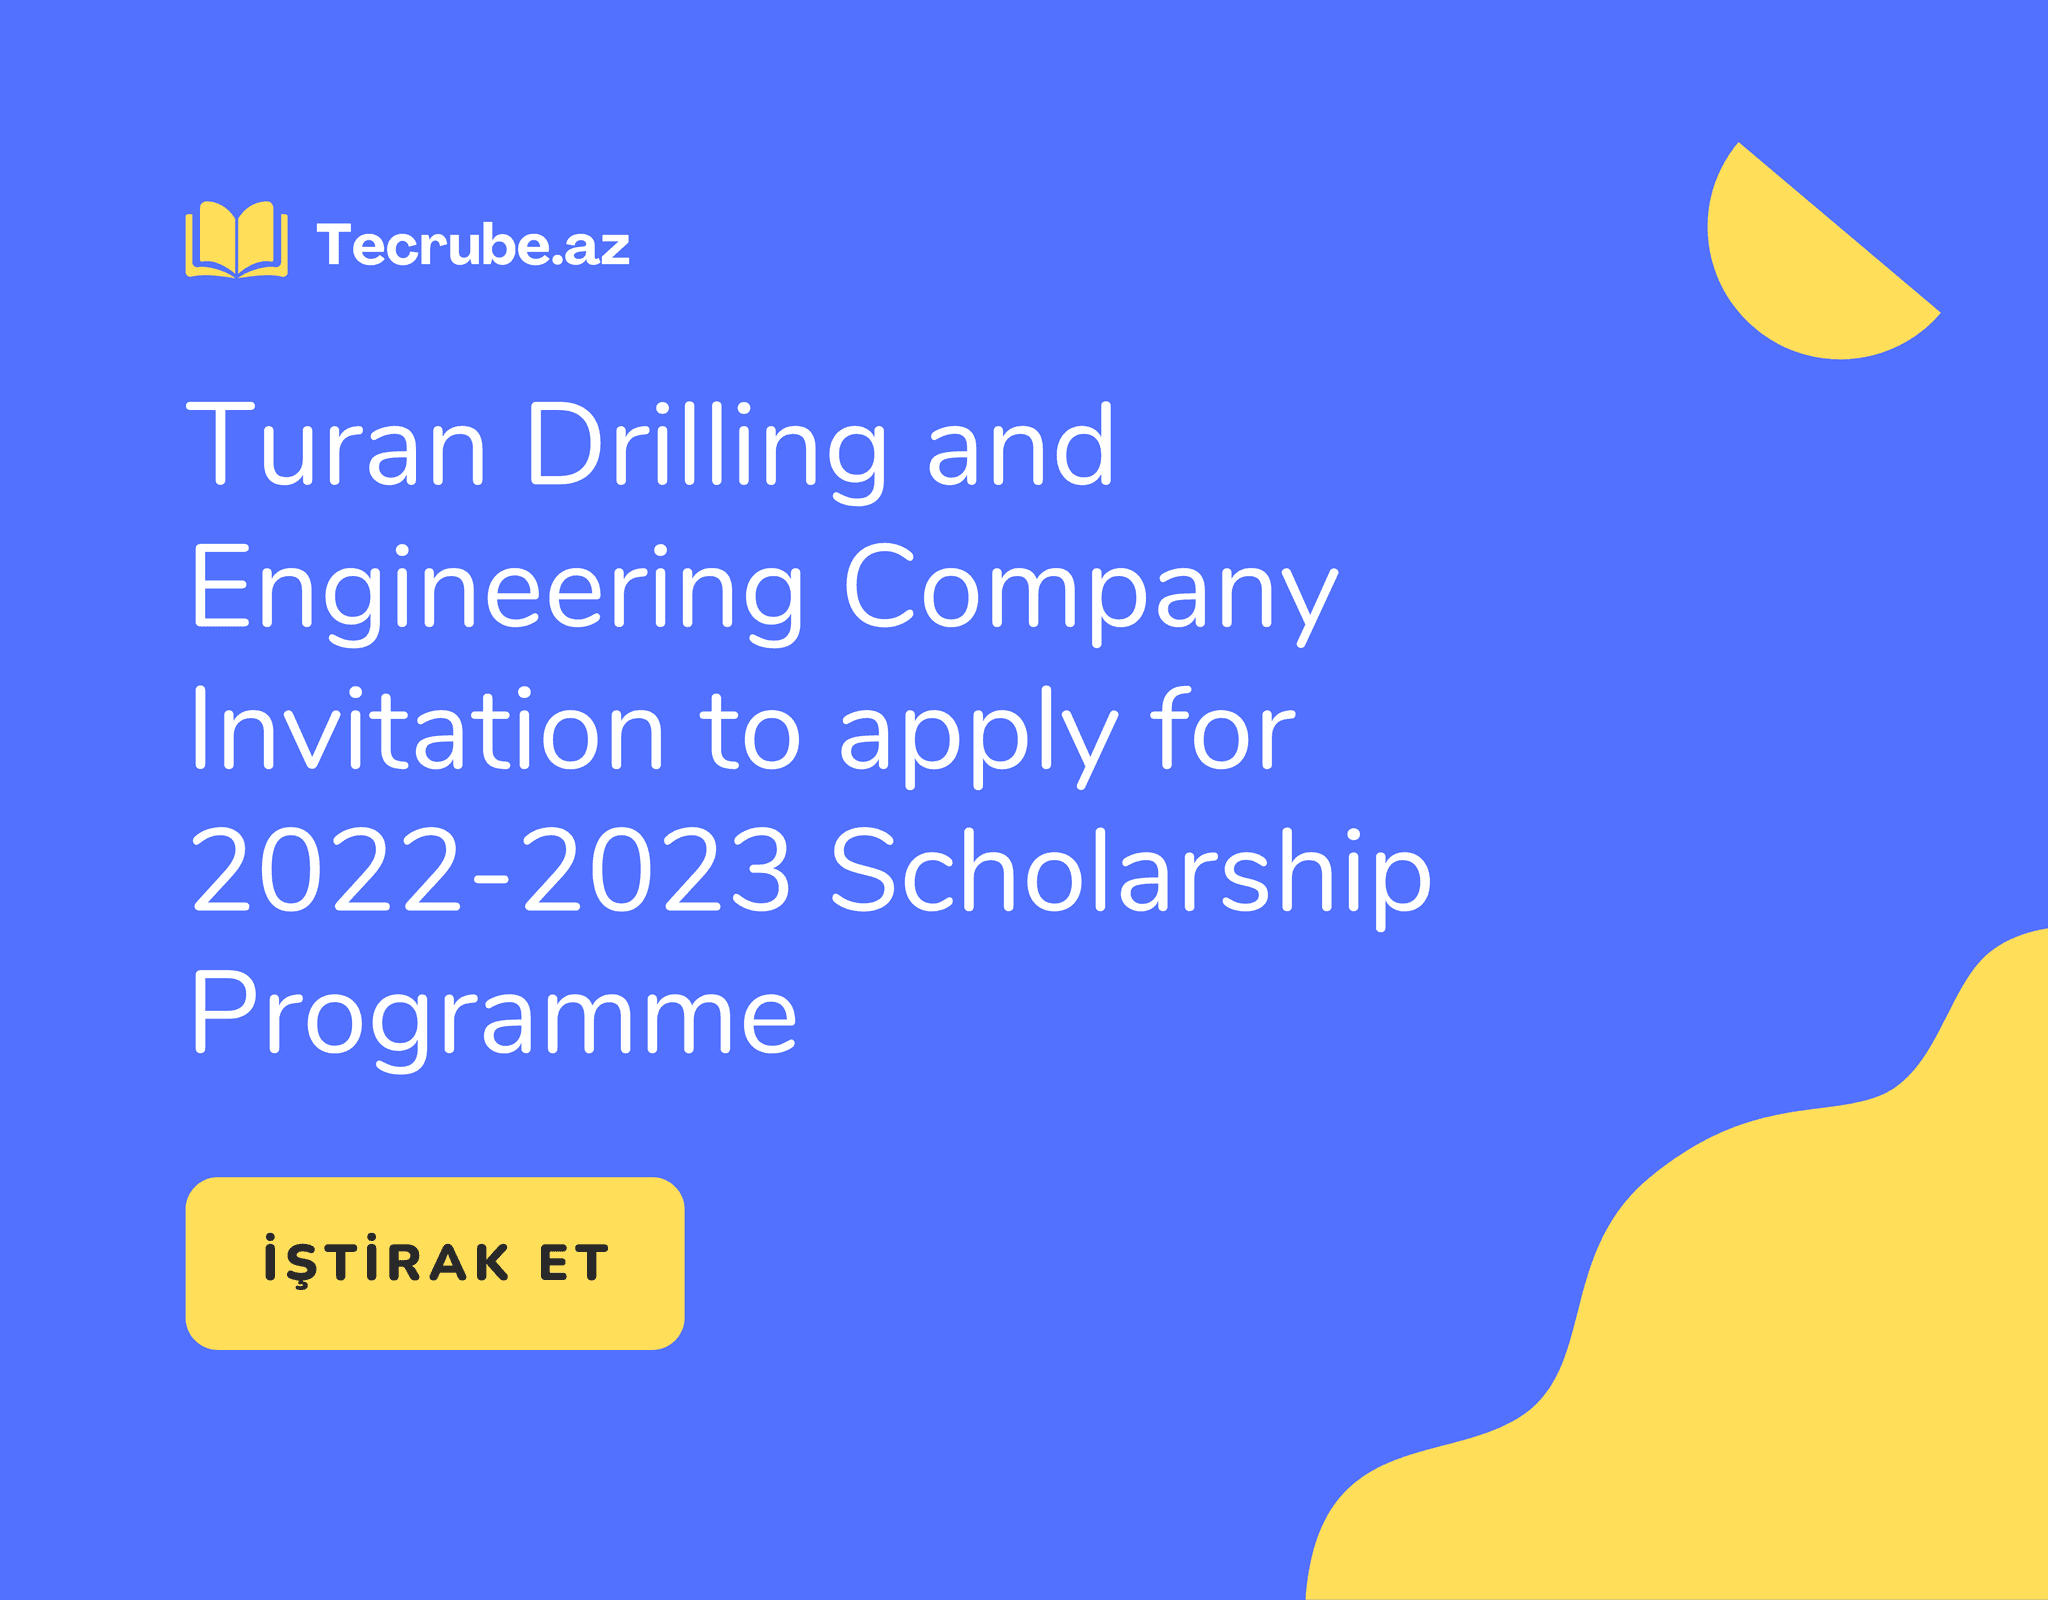 Turan Drilling and Engineering Company Invitation to apply for 2022-2023 Scholarship Programme